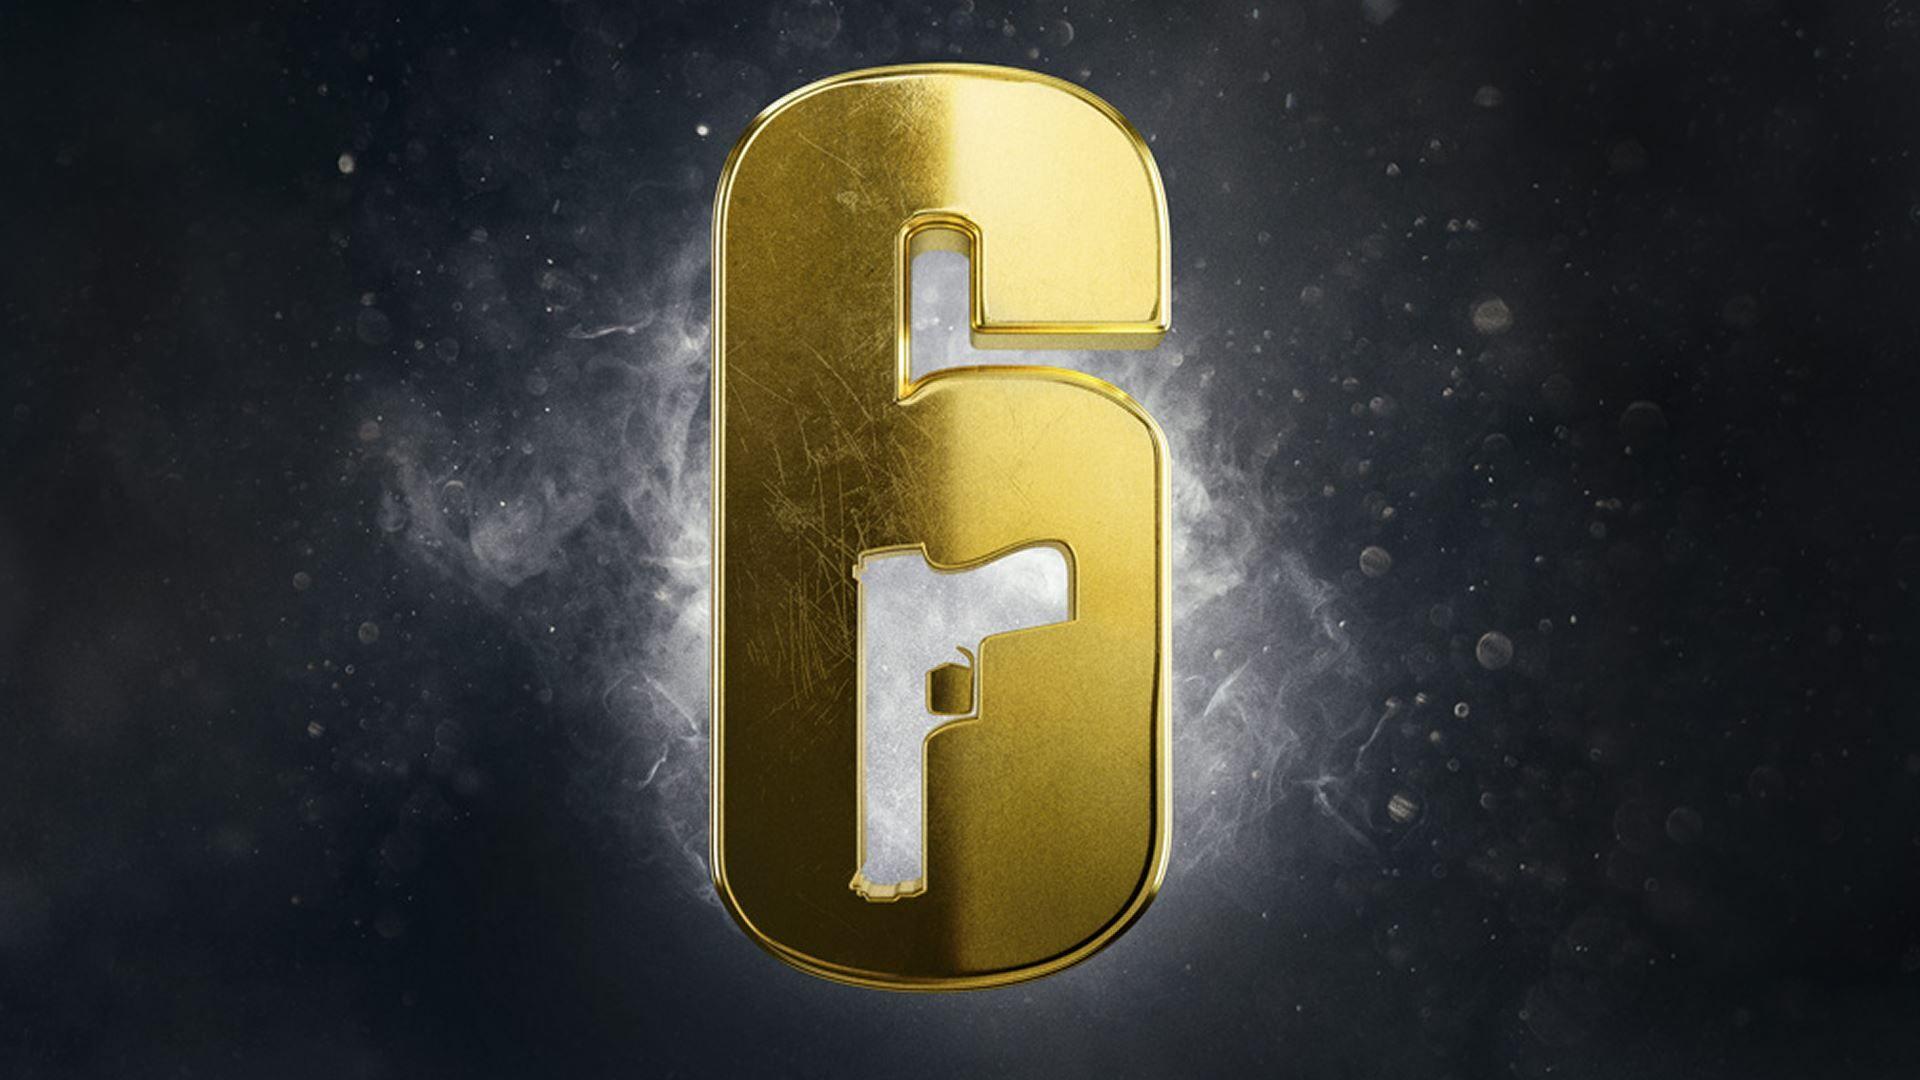 Celebrate Rainbow Six Siege Pro League with new content and Year 2